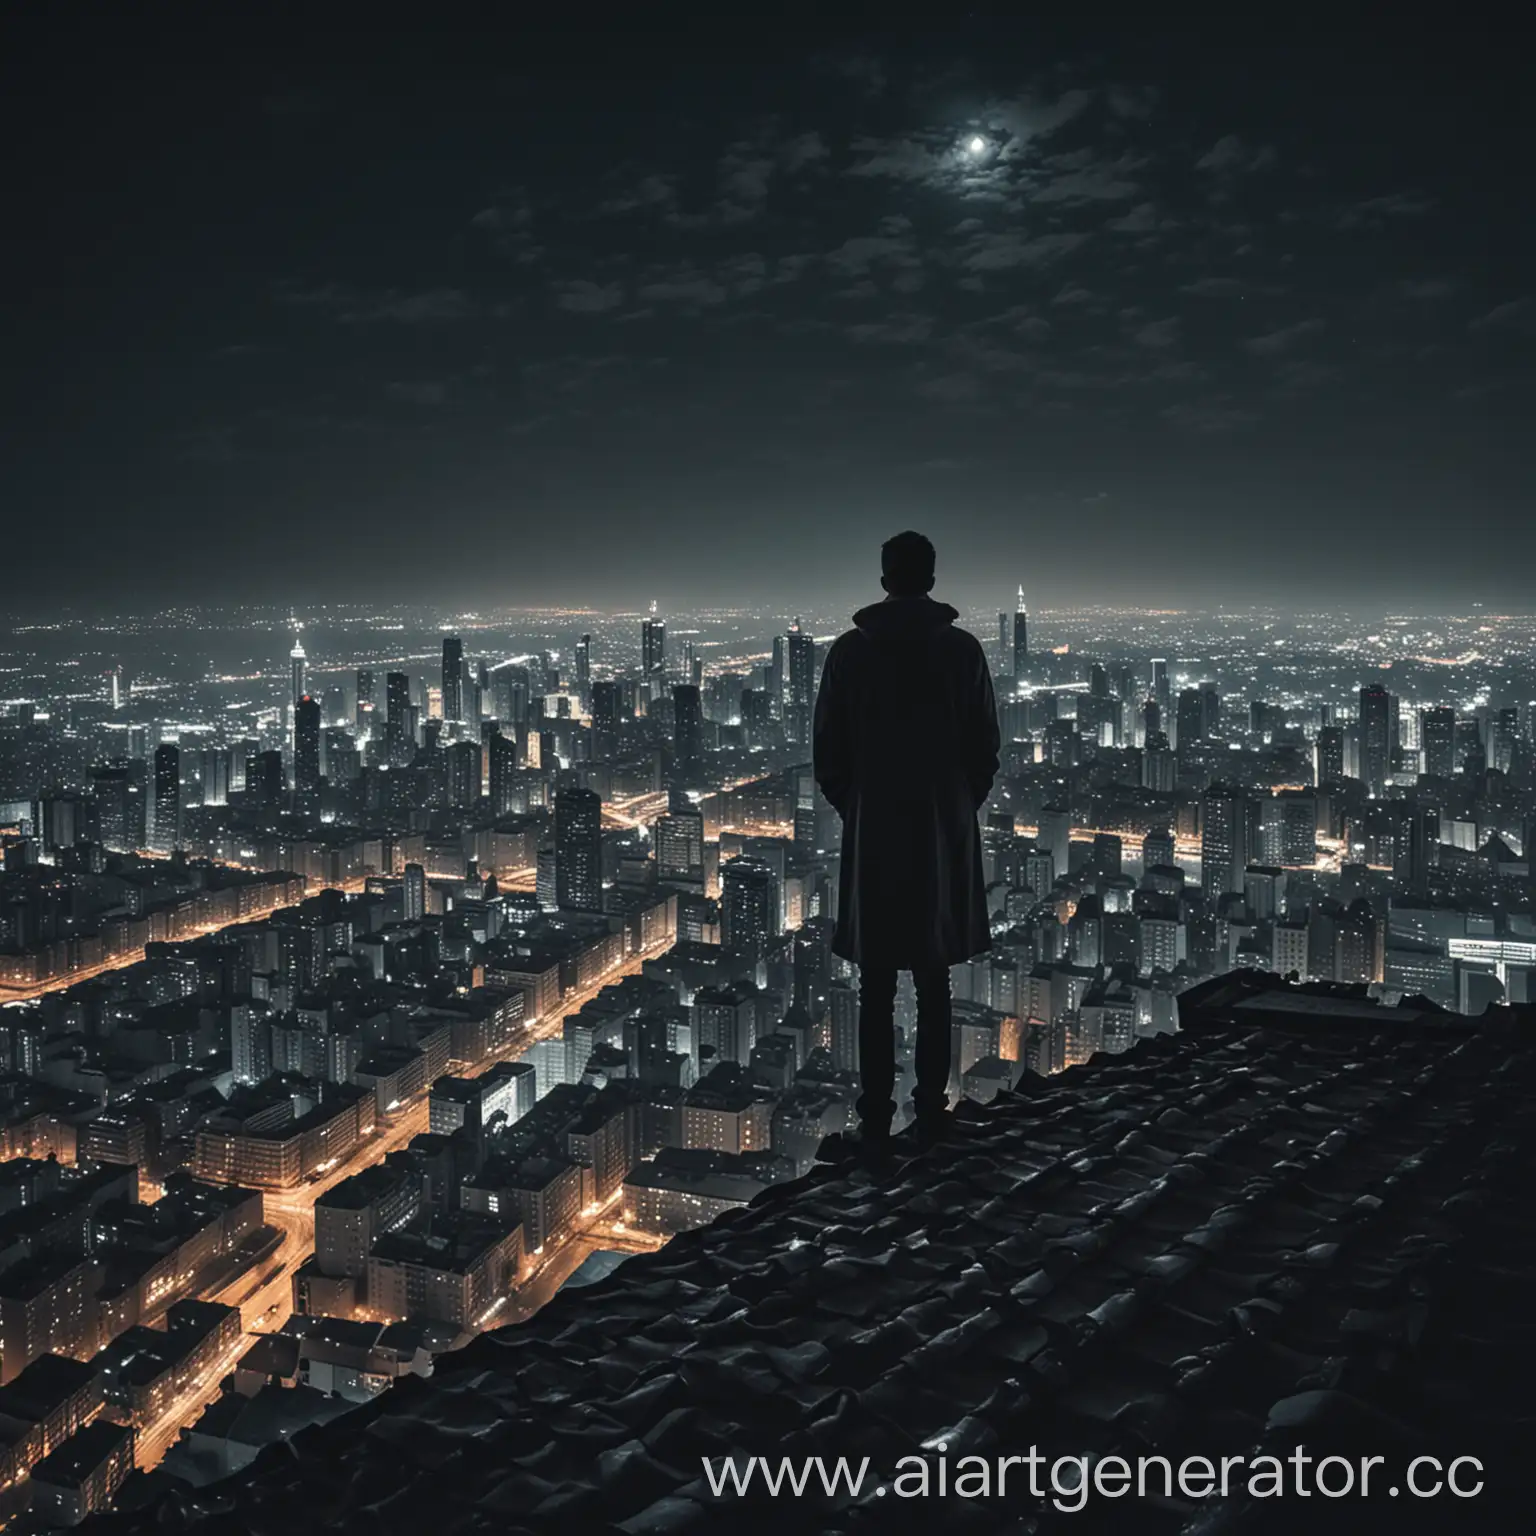 A man stands on the edge of the roof and watches the night city